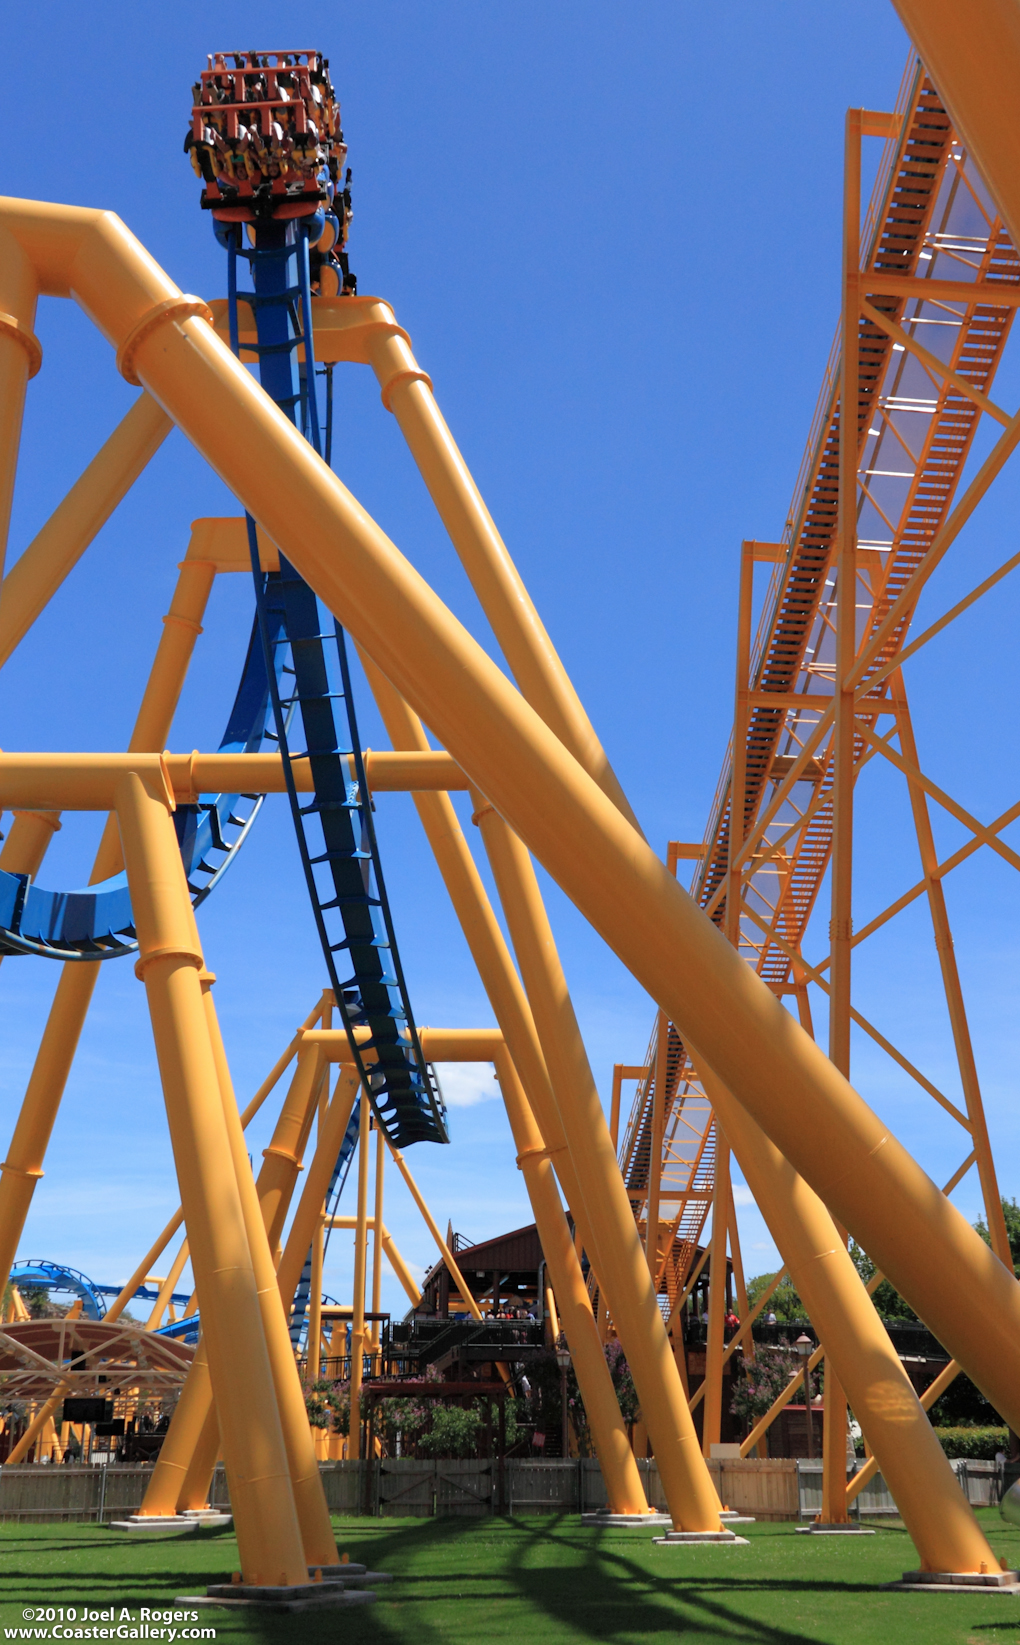 Stock image of a blue and yellow roller coaster